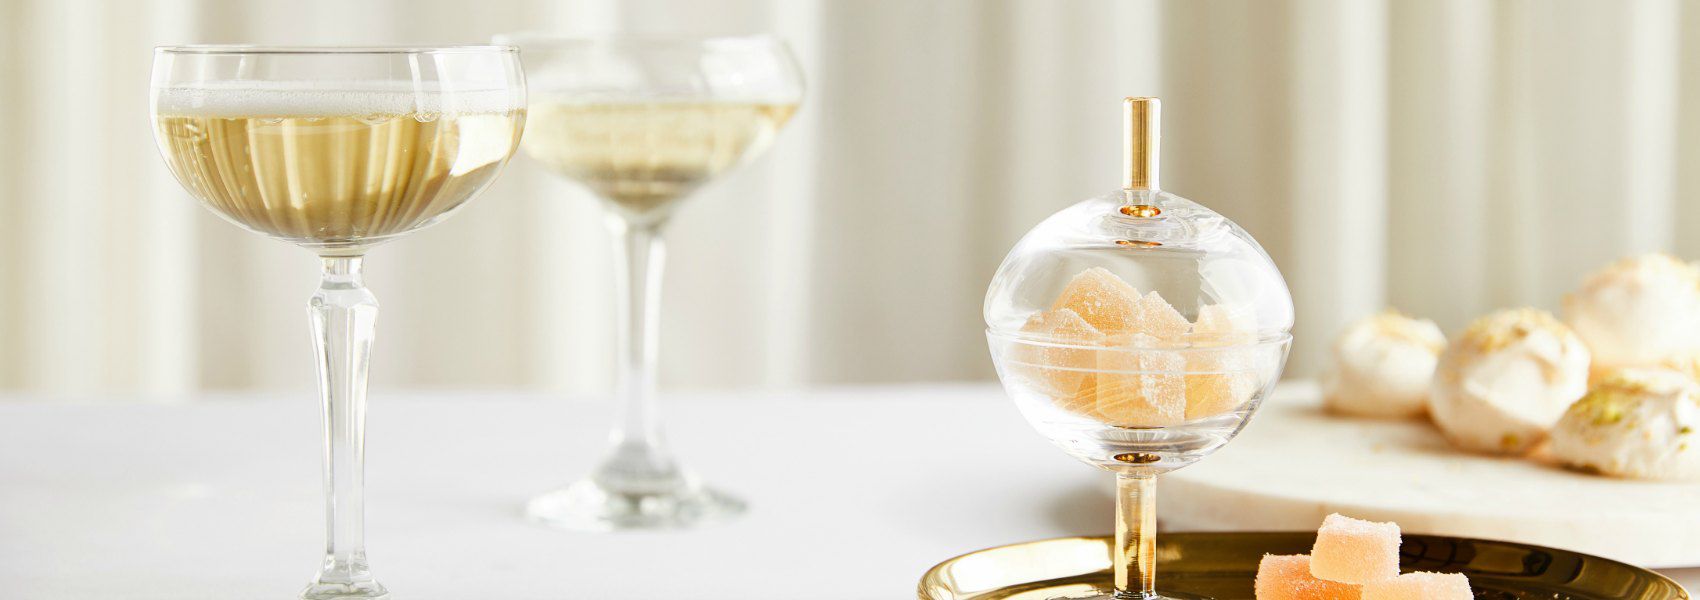 close up of two champagne glasses filled with bubbly and a glass candy jar